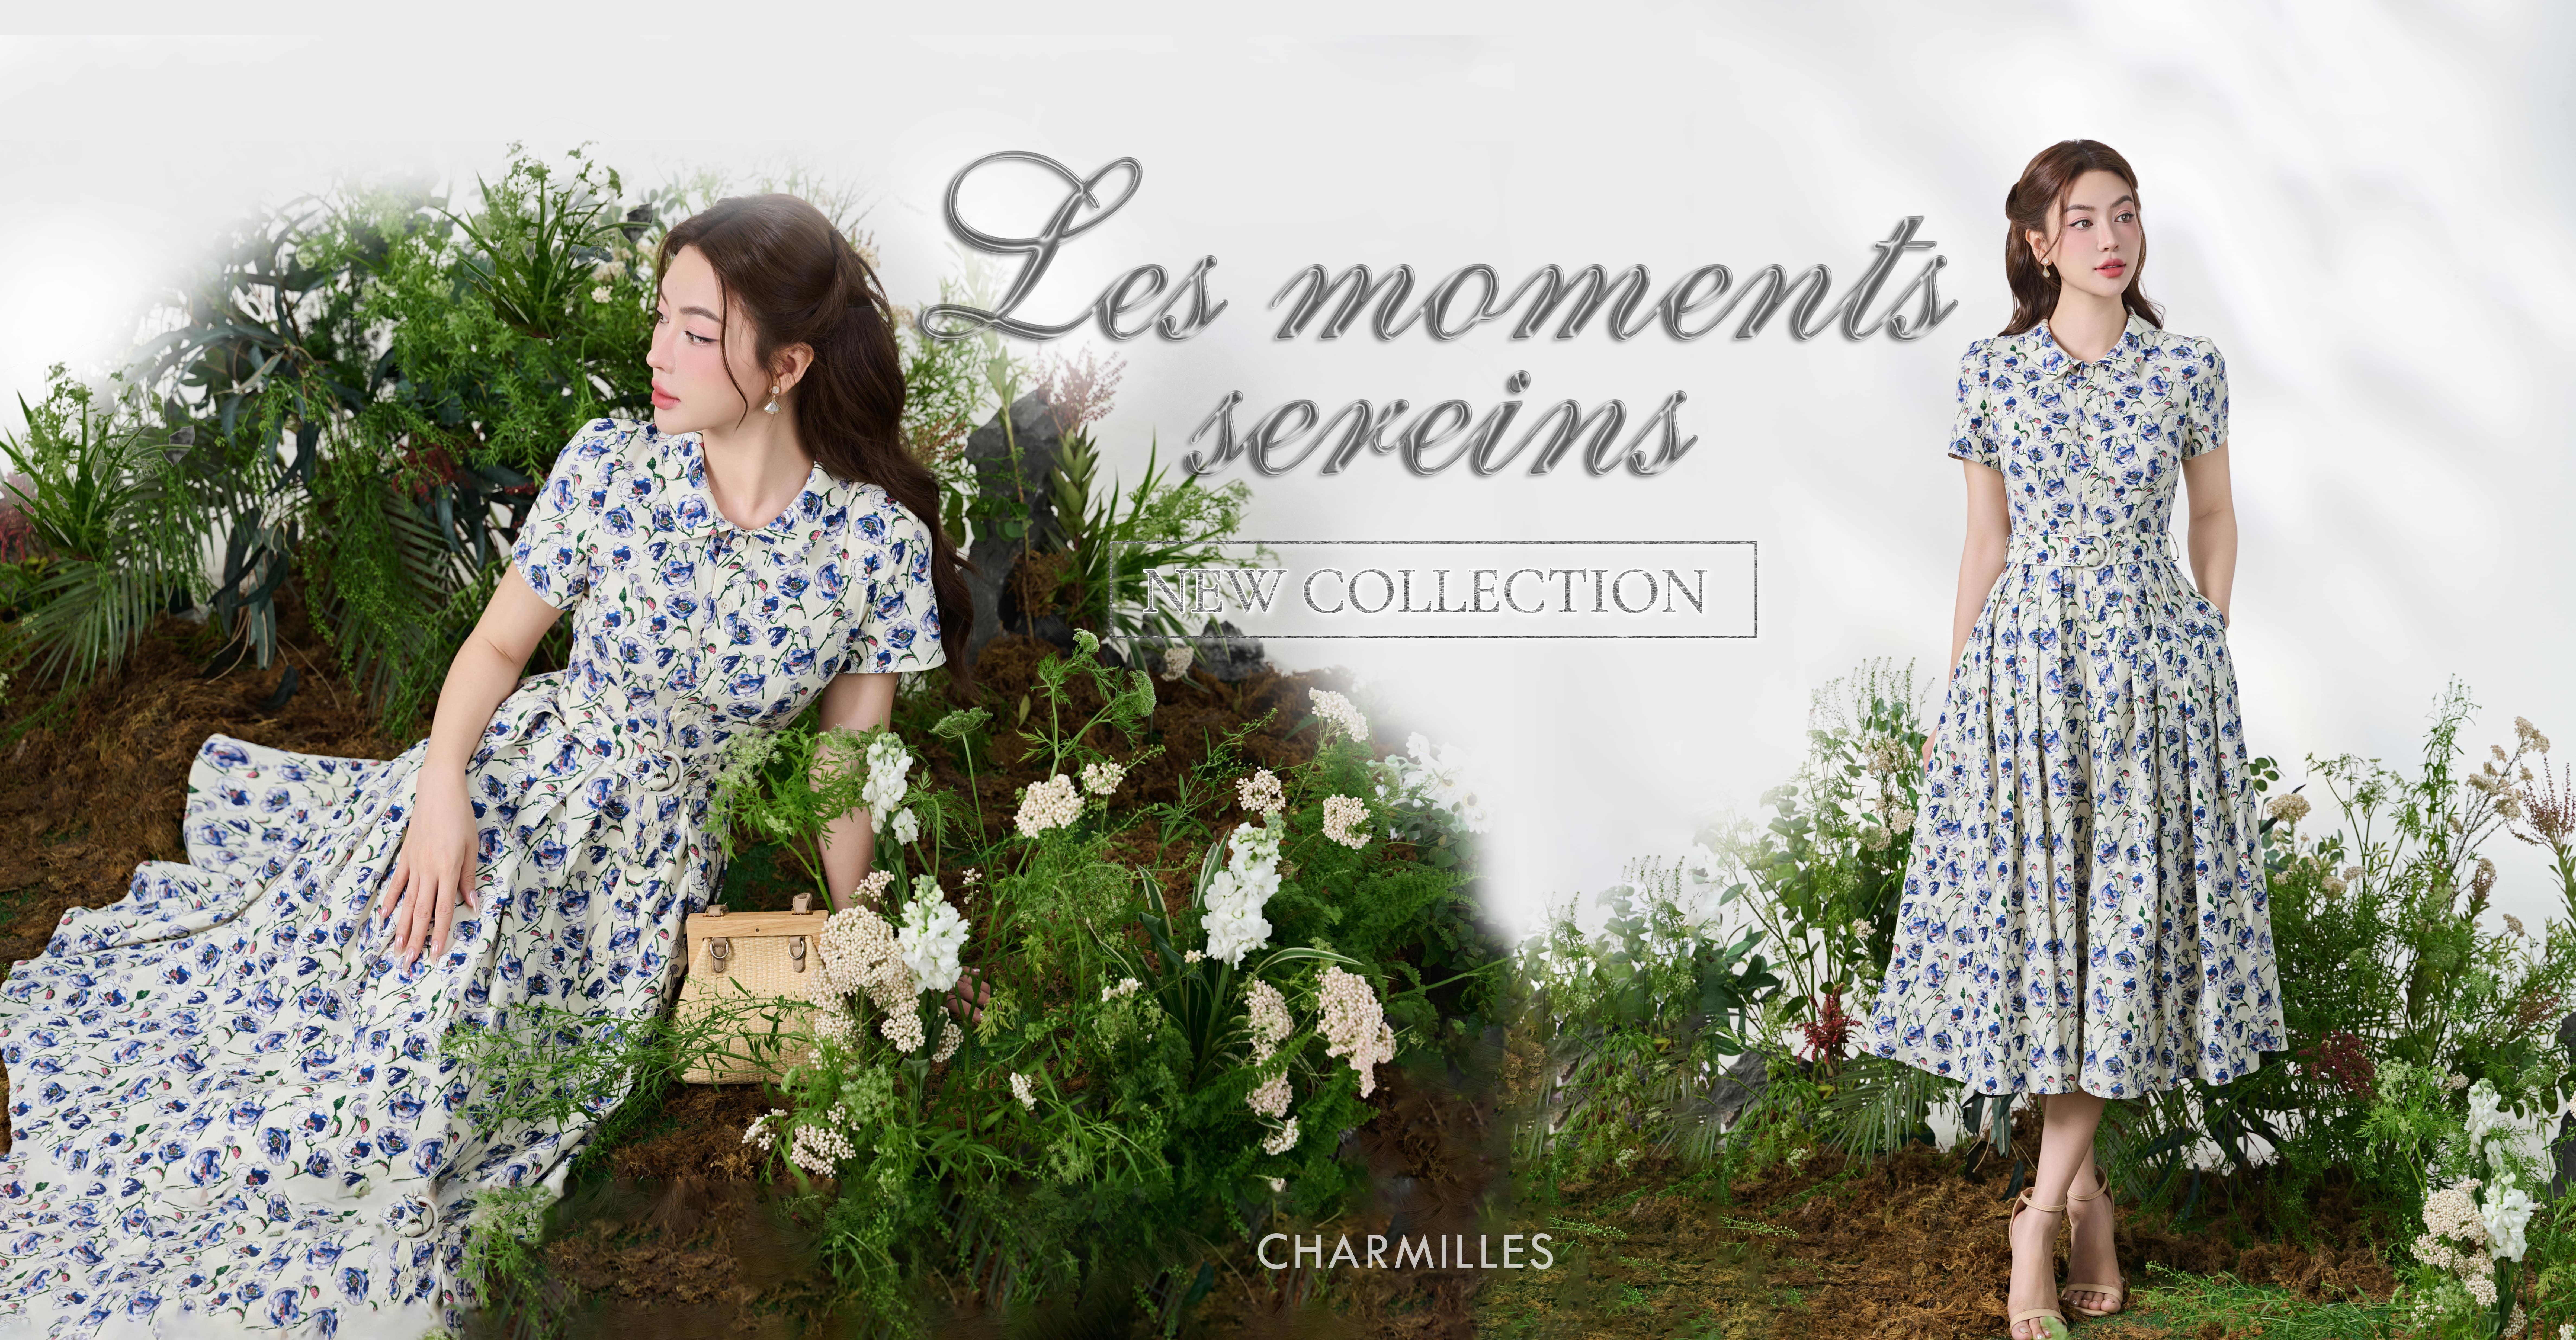 NEW COLLECTION - LES MOMENTS SEREINS